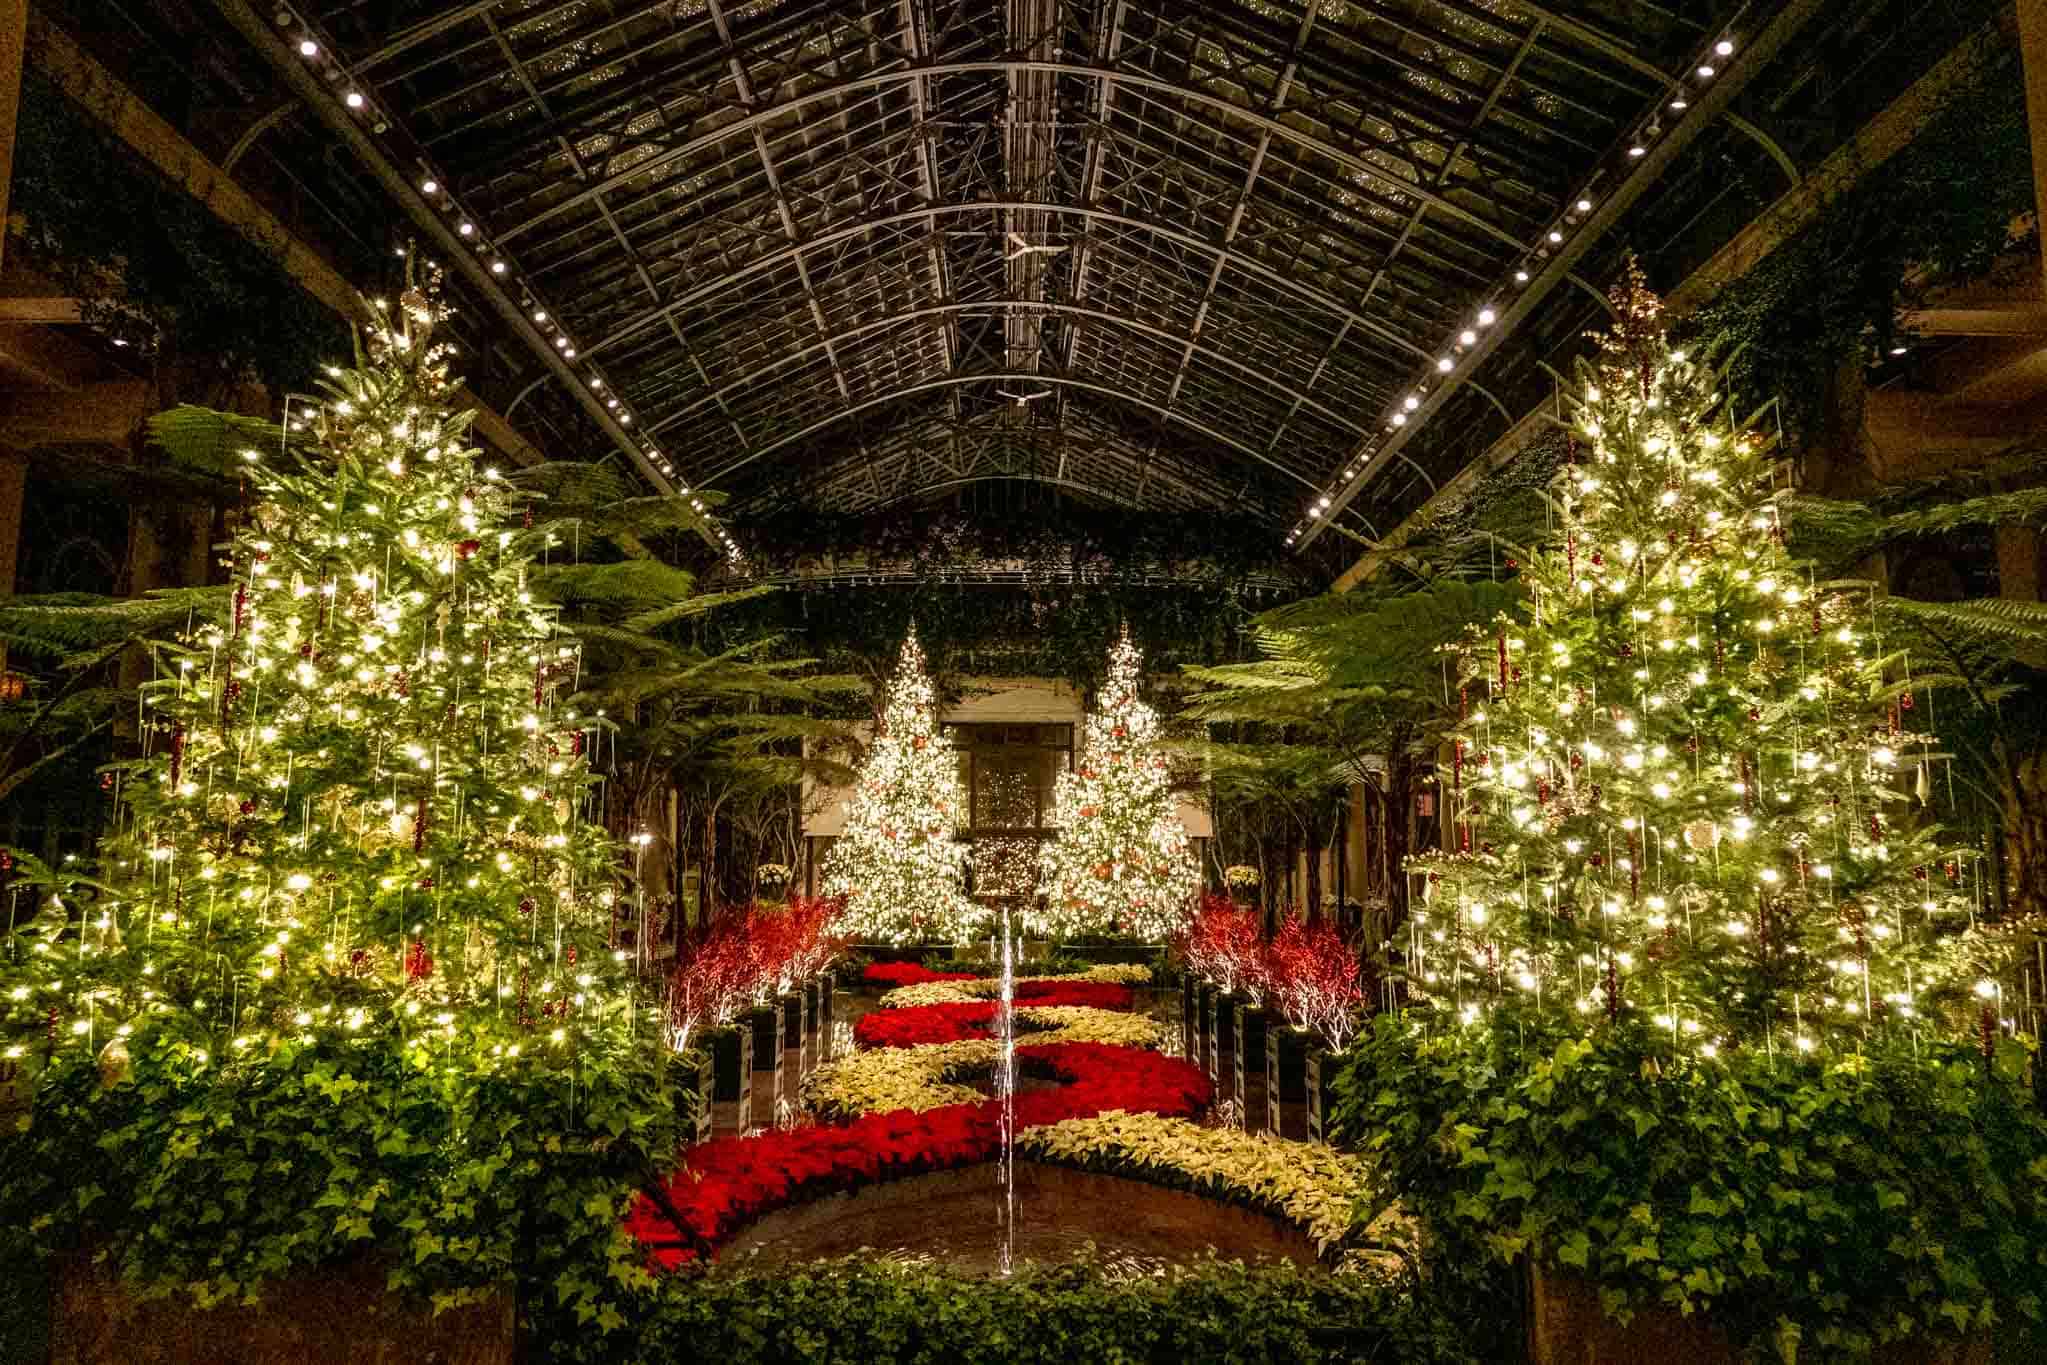 Christmas trees with white lights beside red, white, and green plants inside a conservatory